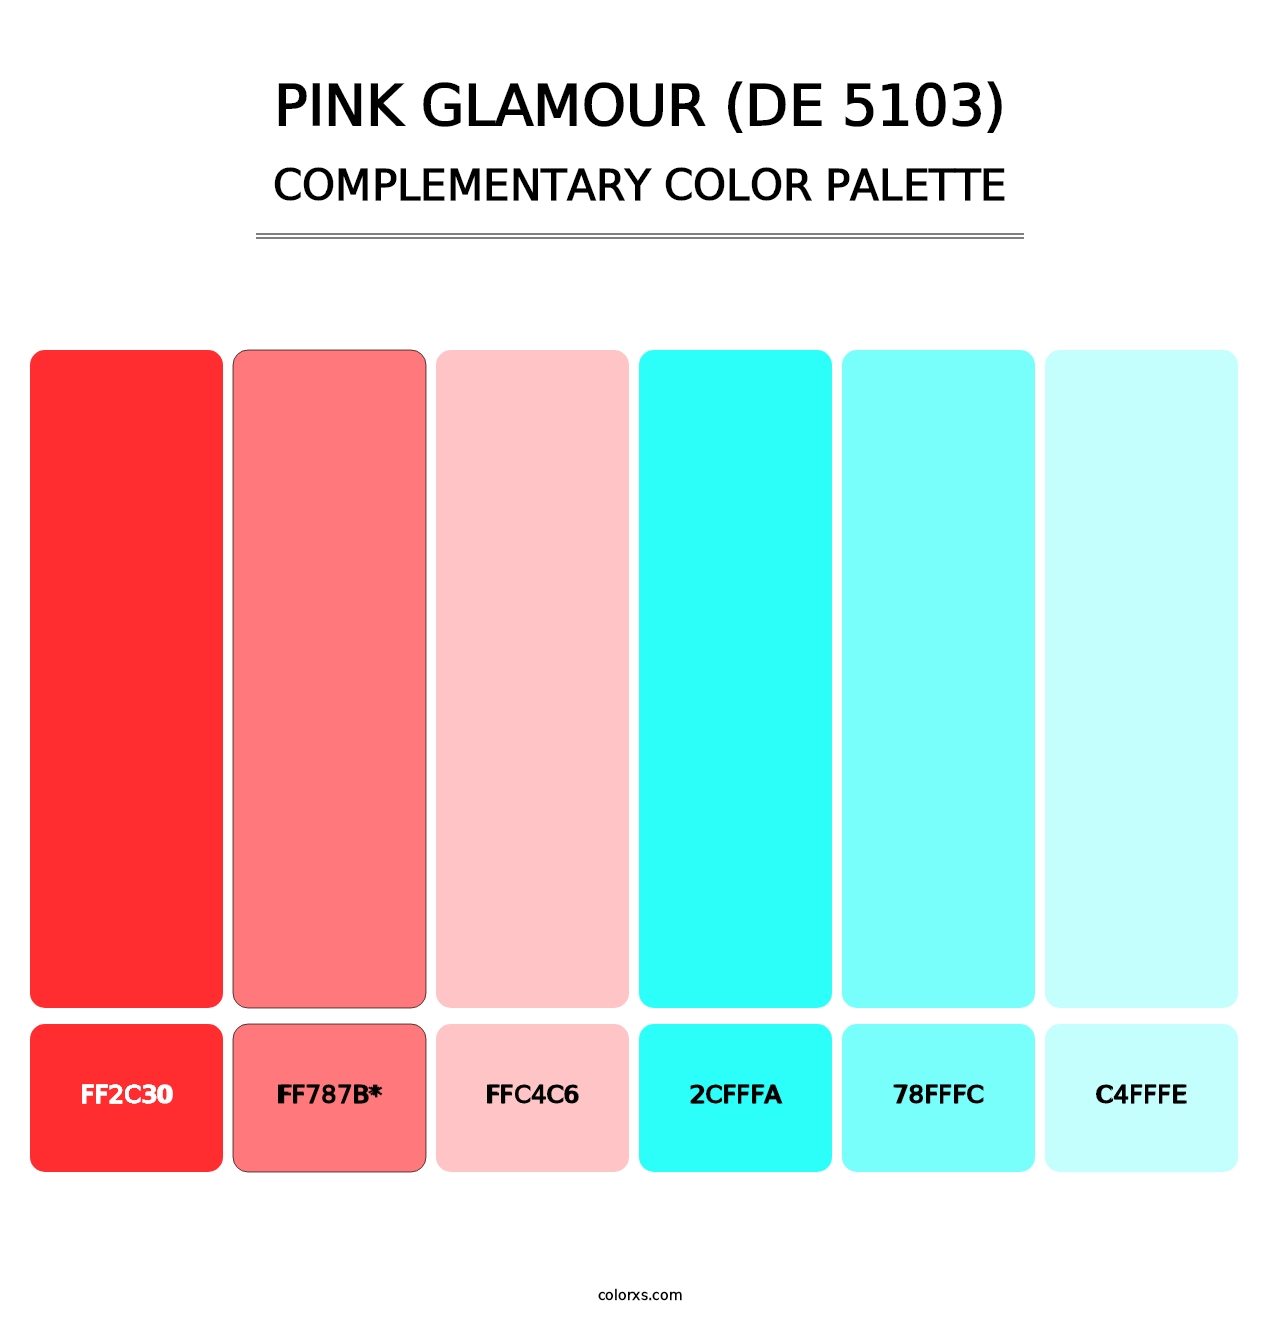 Pink Glamour (DE 5103) - Complementary Color Palette